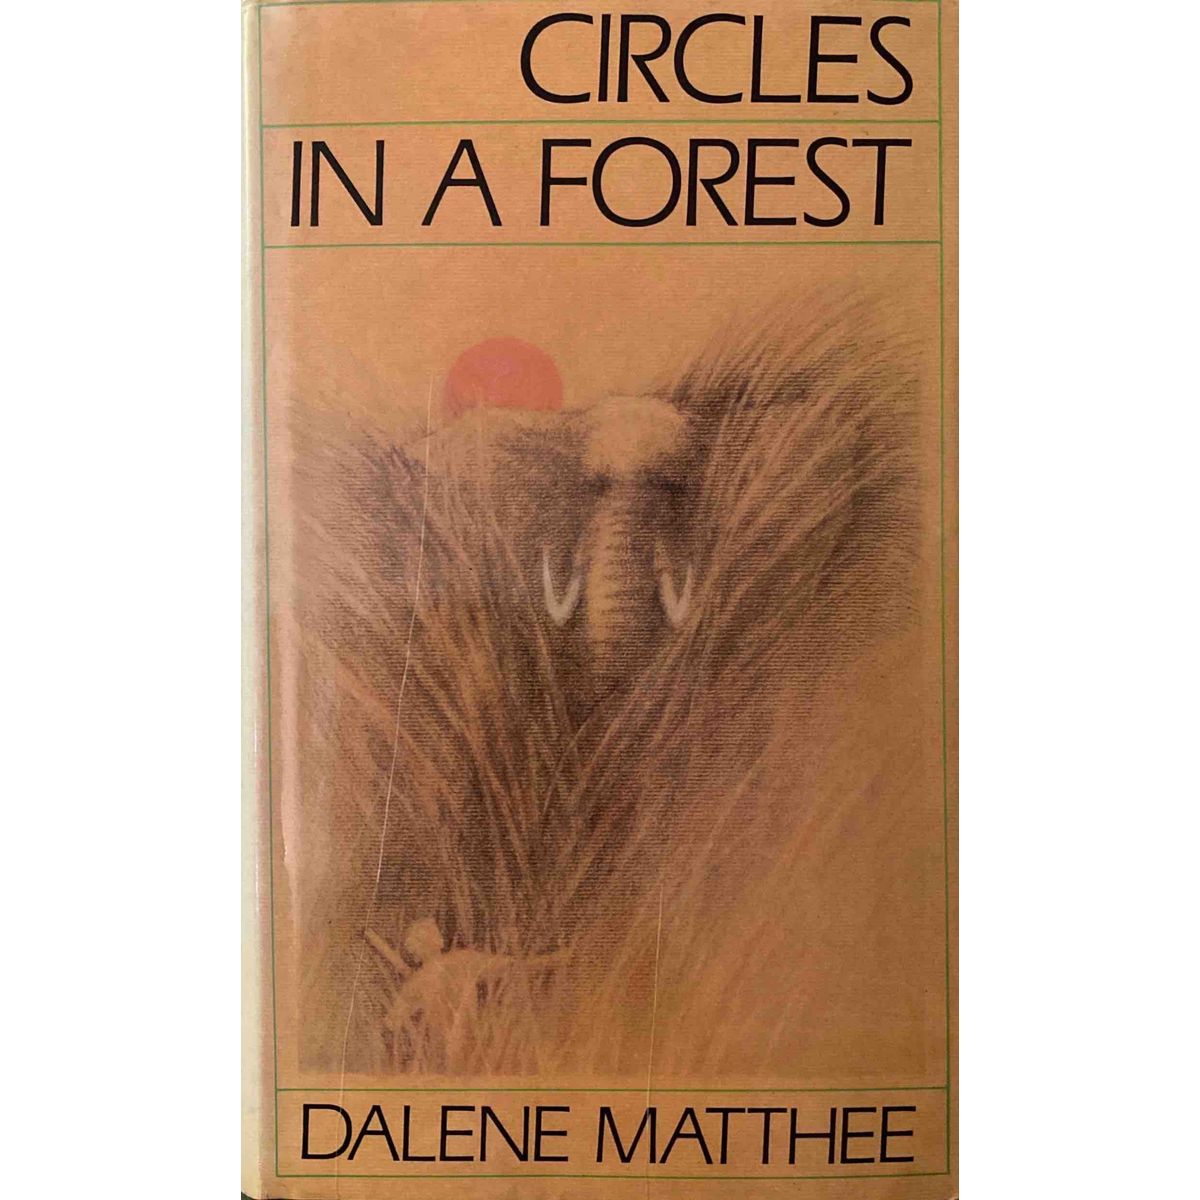 ISBN: 9780670800094 / 0670800090 - Circles in a Forest by Dalene Matthee [1984]